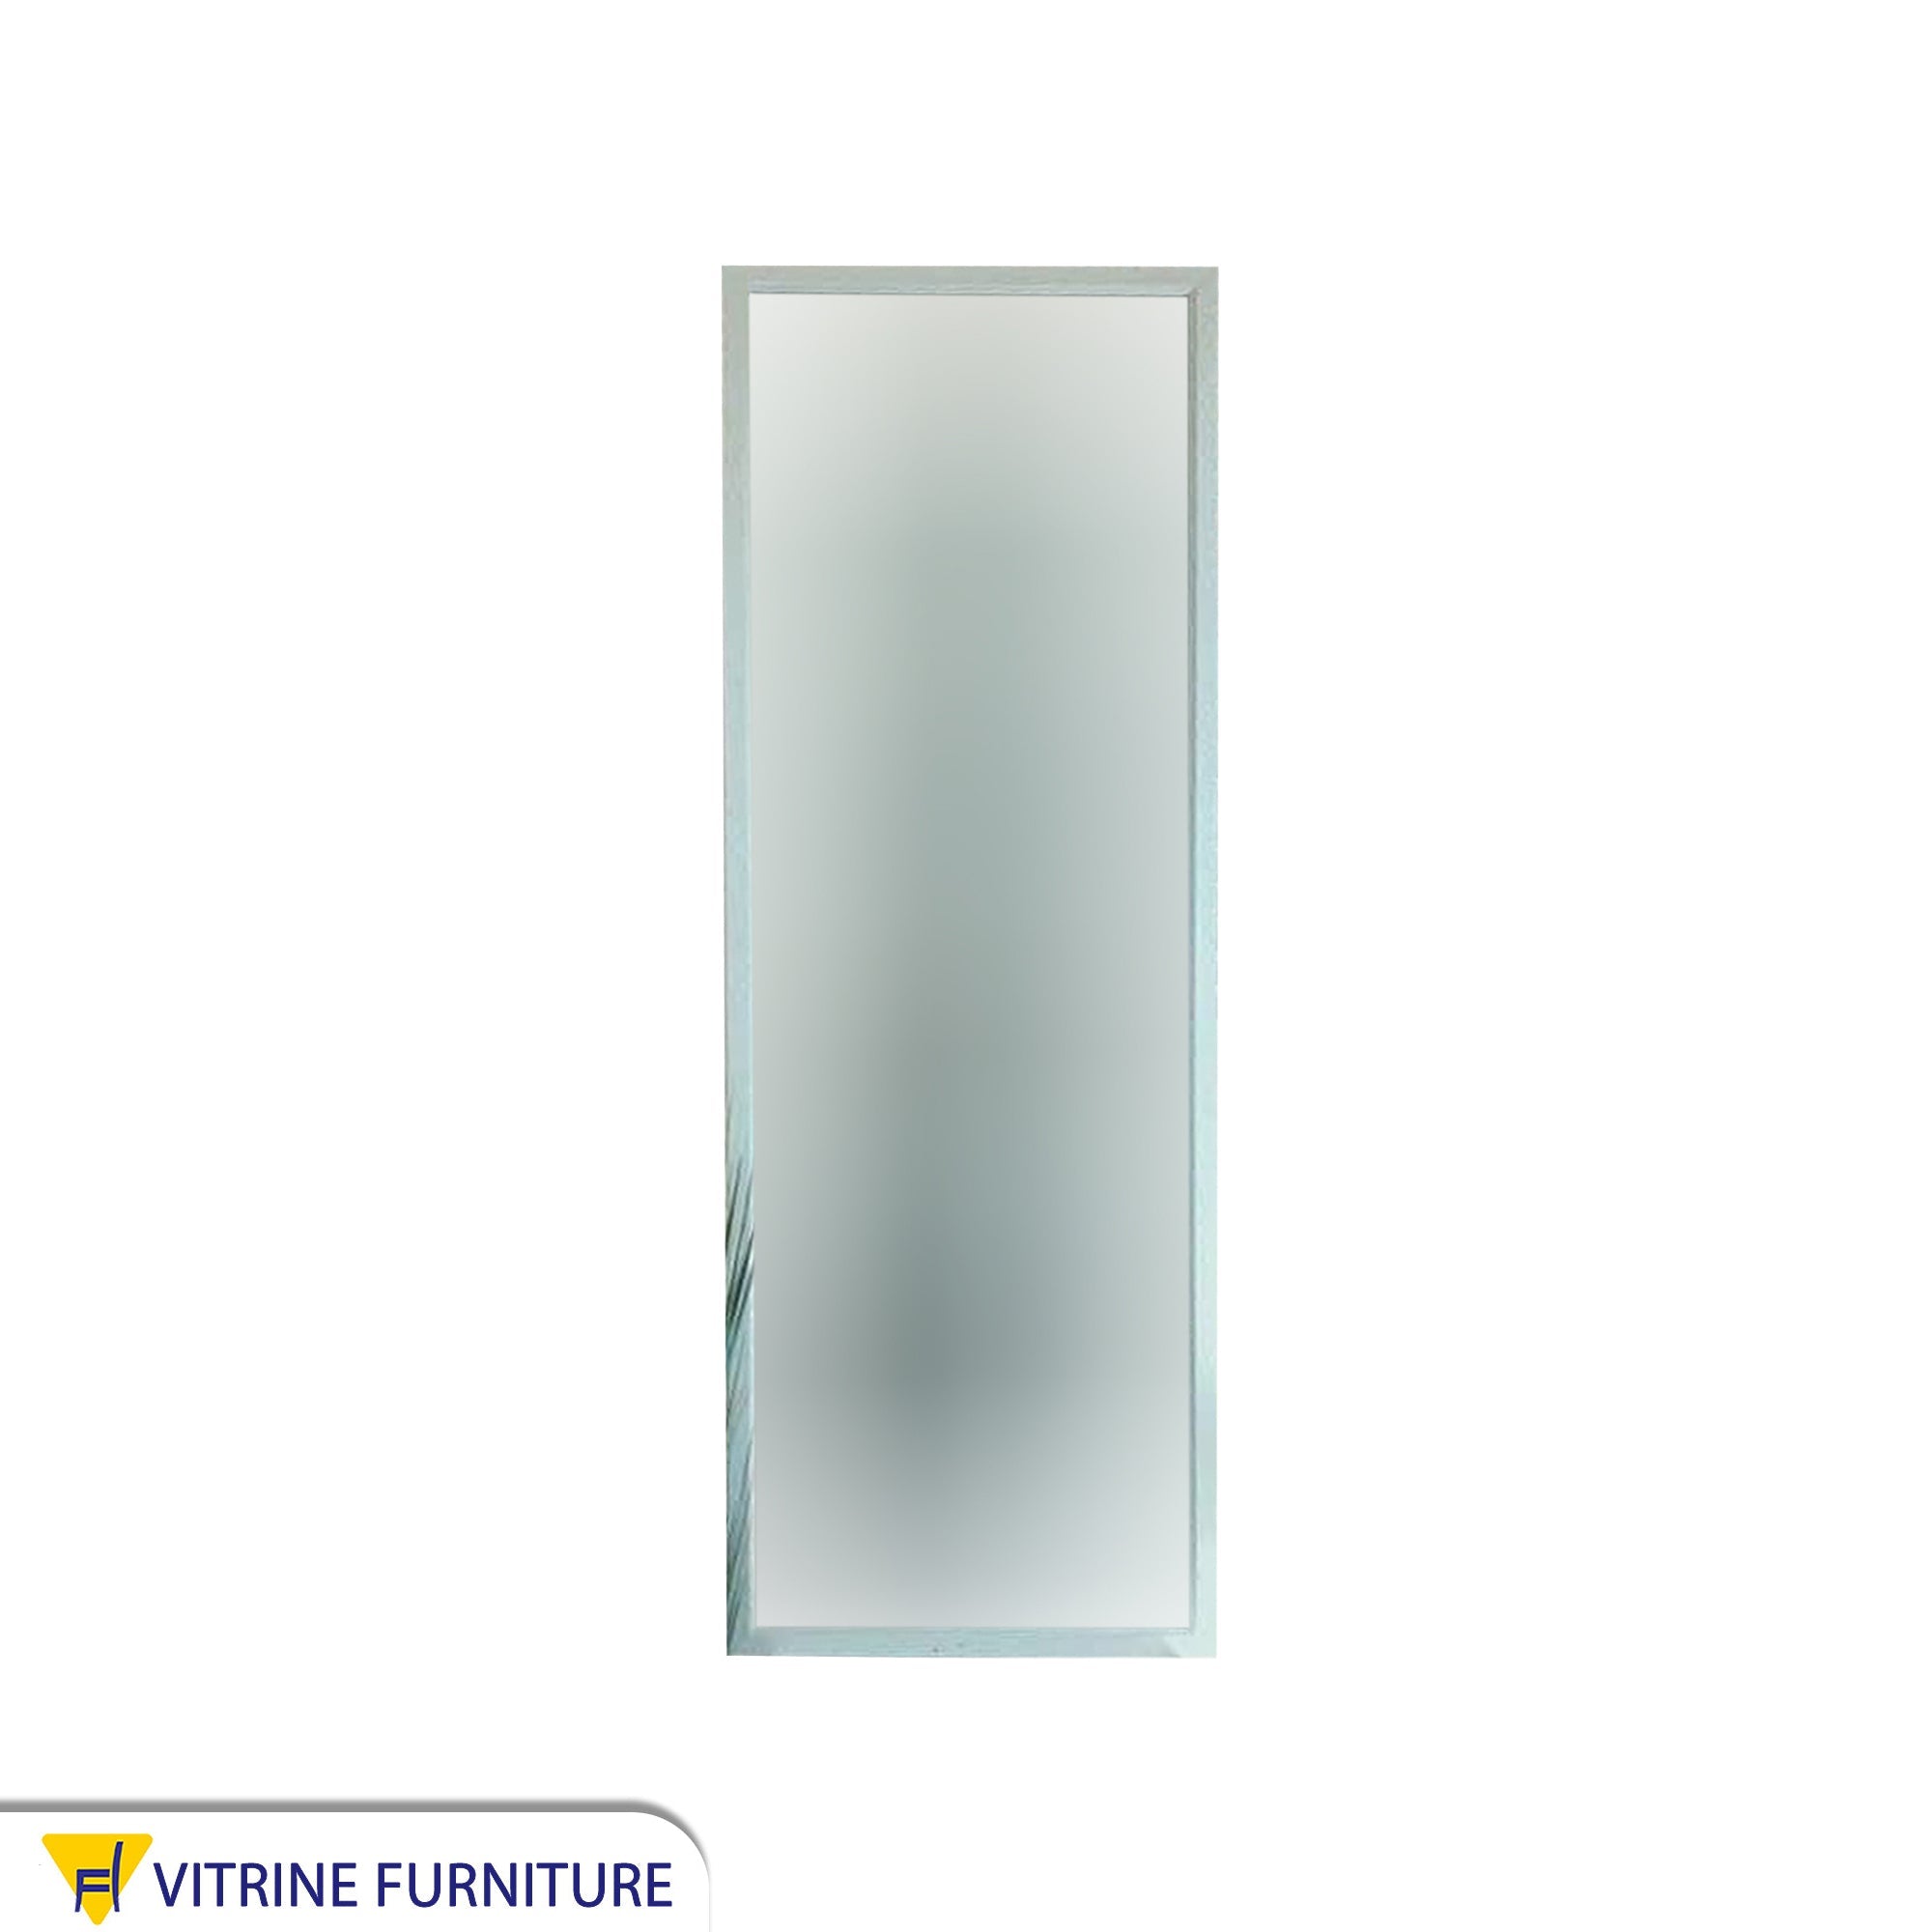 Stand mirror 50*150 with wide white frame